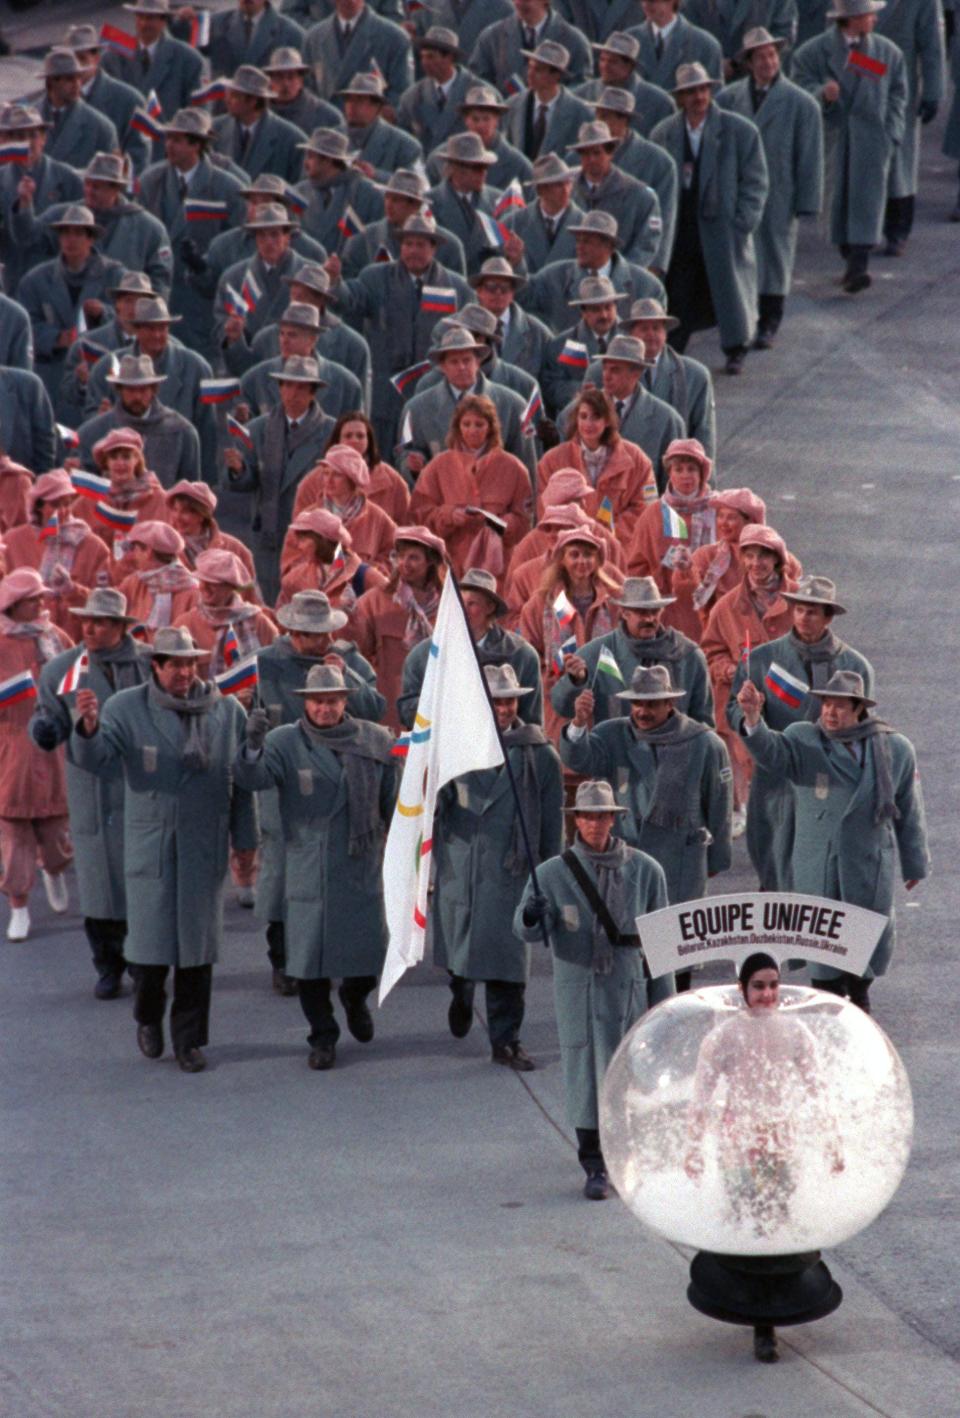 The Russian team dressed in long coats and hats at the 1992 Olympics.